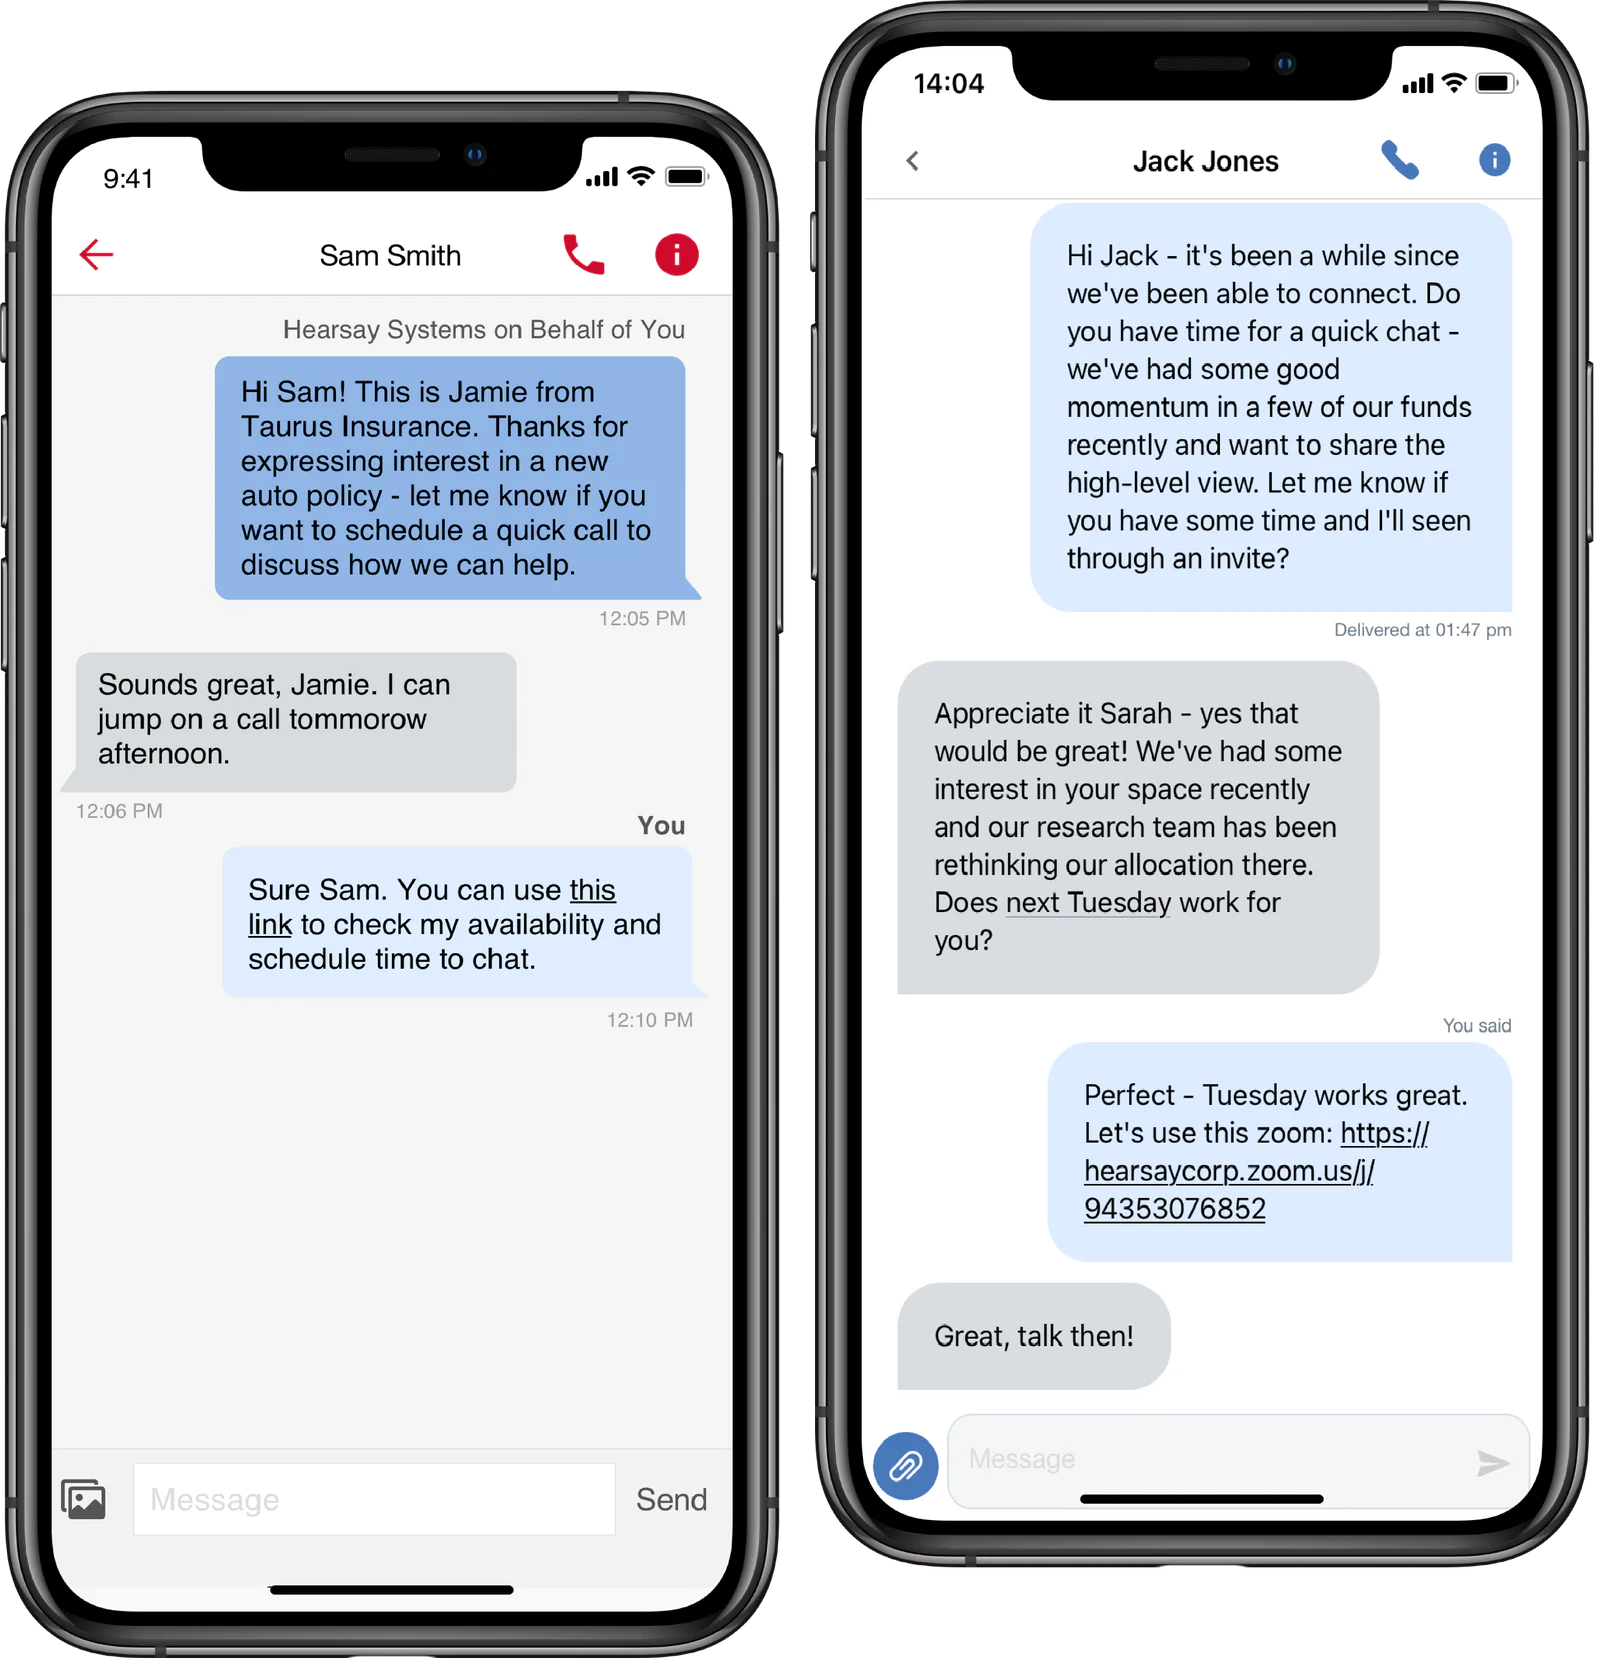 Hearsay allows financial services advisors to engage clients via text channels with Twilio